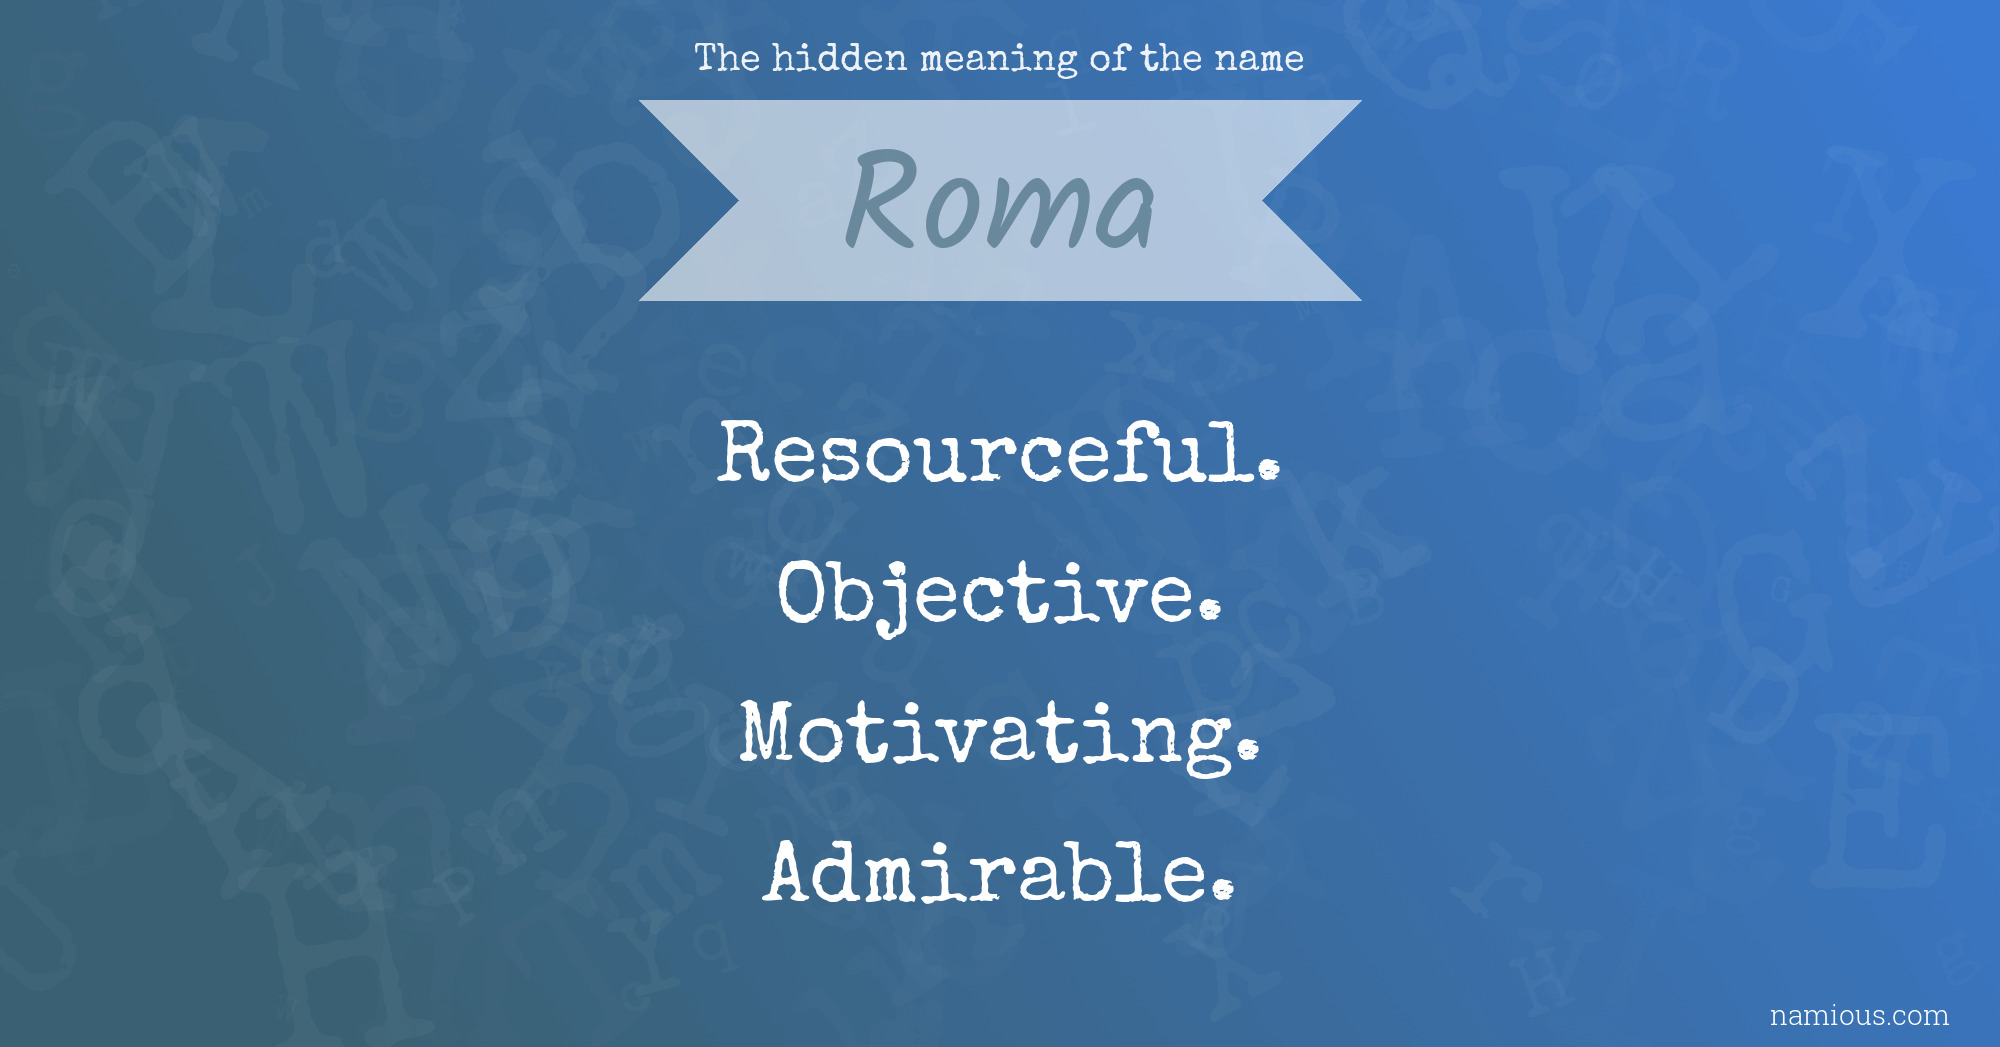 The hidden meaning of the name Roma